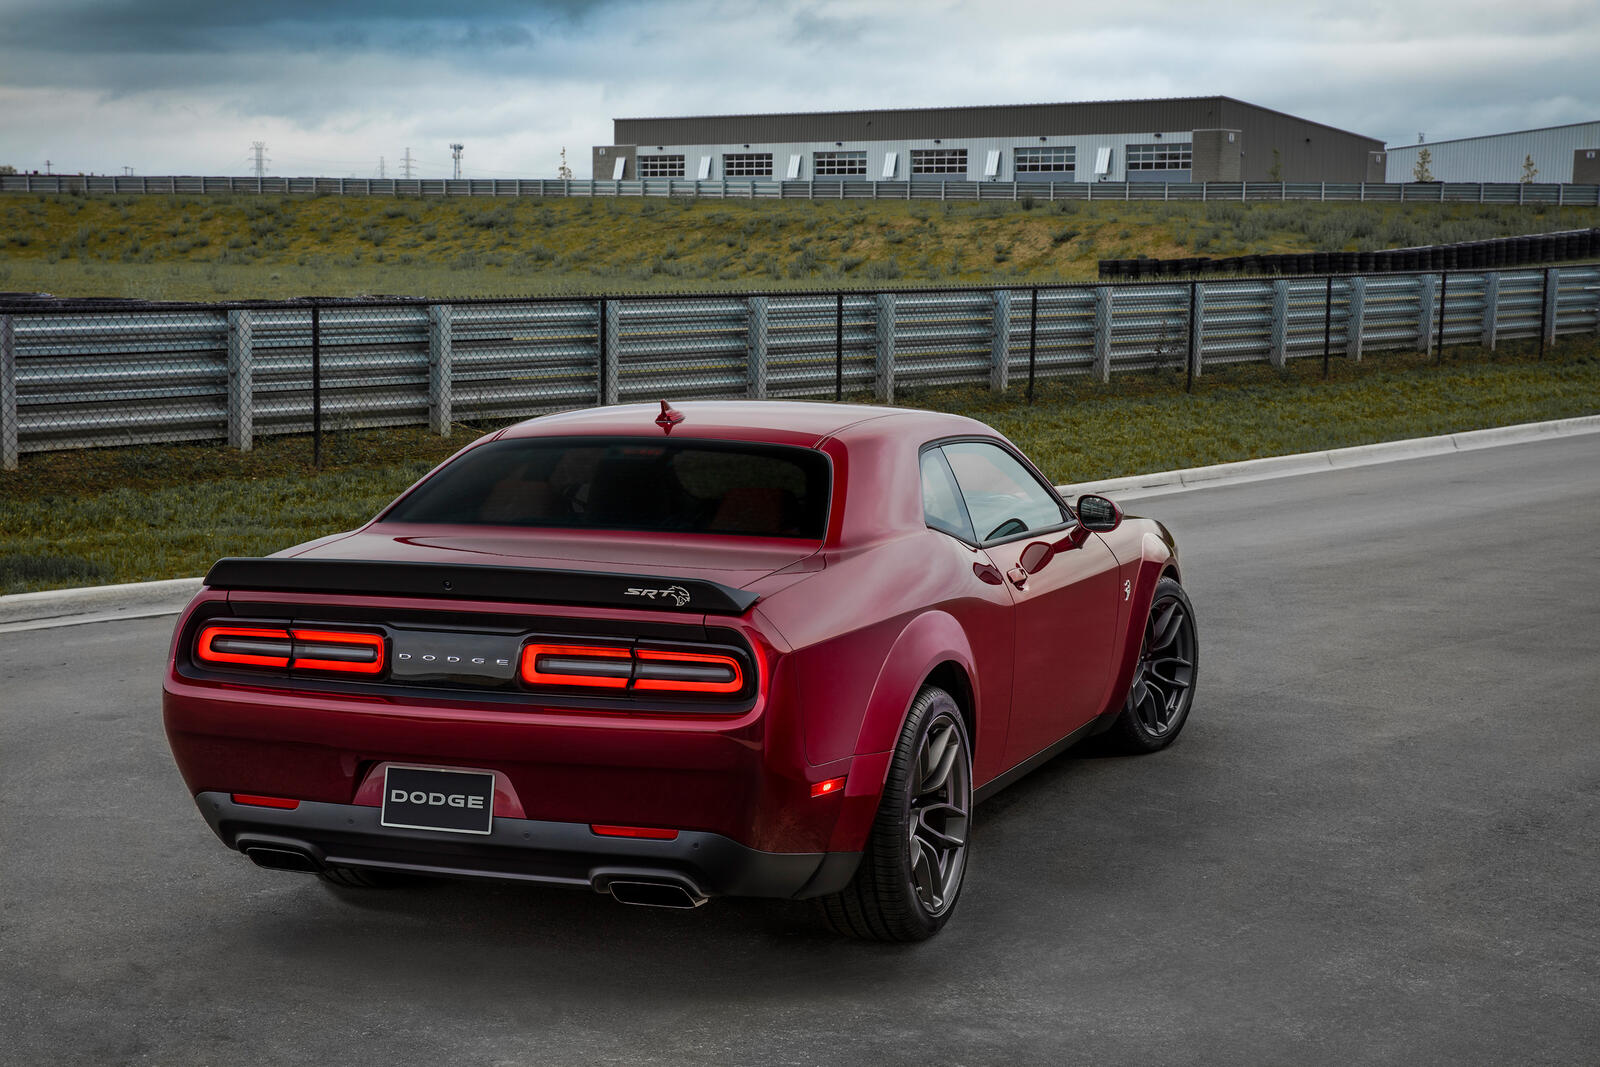 Free photo Dodge Challenger Srt Hellcat Widebody in red photographed from behind